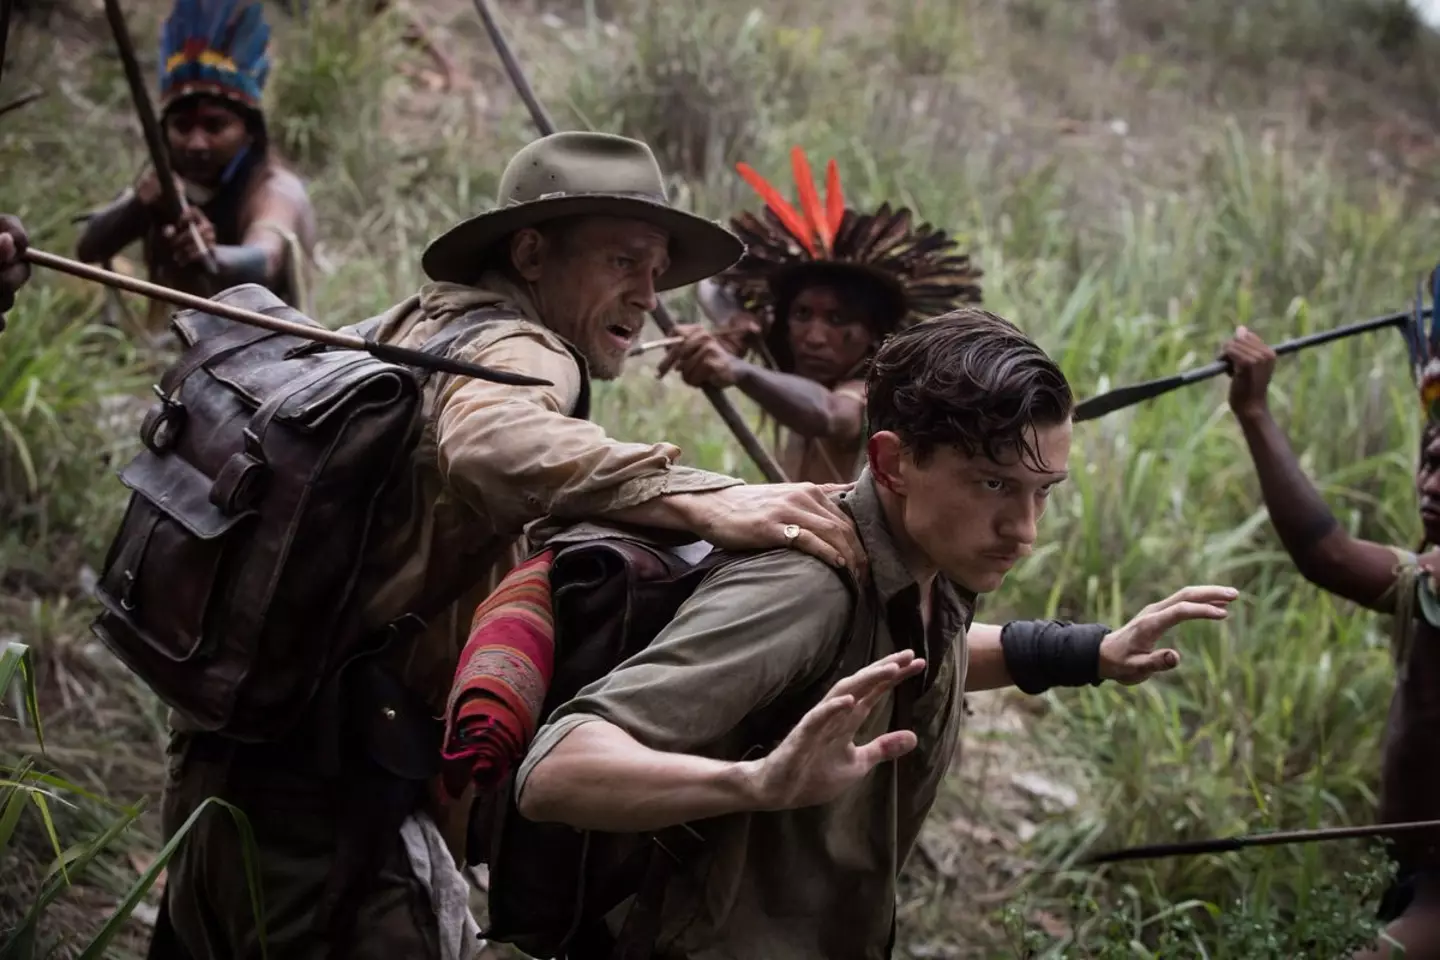 Tom Holland and Robert Pattinson in The Lost City of Z.